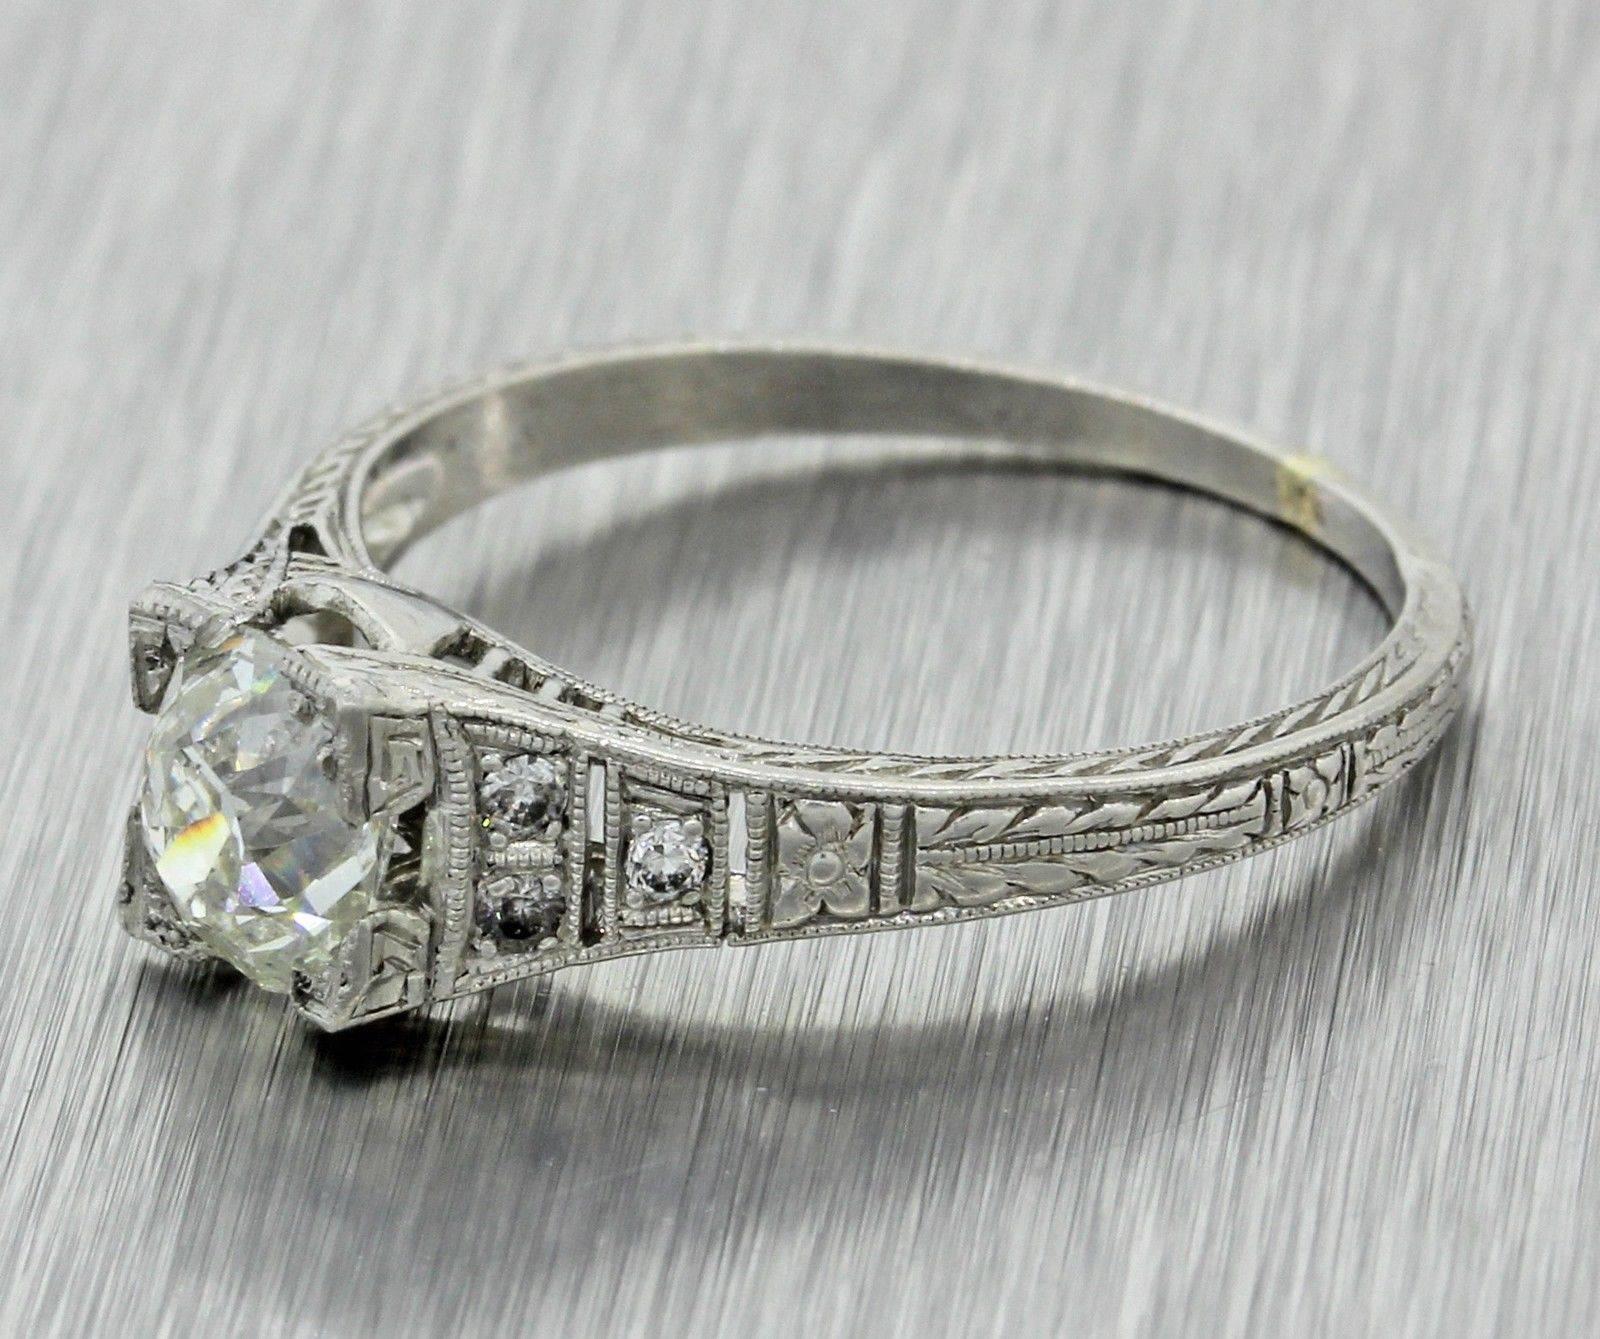 This is a 1940s Vintage Art Deco Platinum .95ctw Old Mine Cut Diamond Engagement Ring EGL. This ring suggested retail price is $4,700 USD. It will come in a lovely ring box for a perfect presentation and our unconditional 30 day money back return